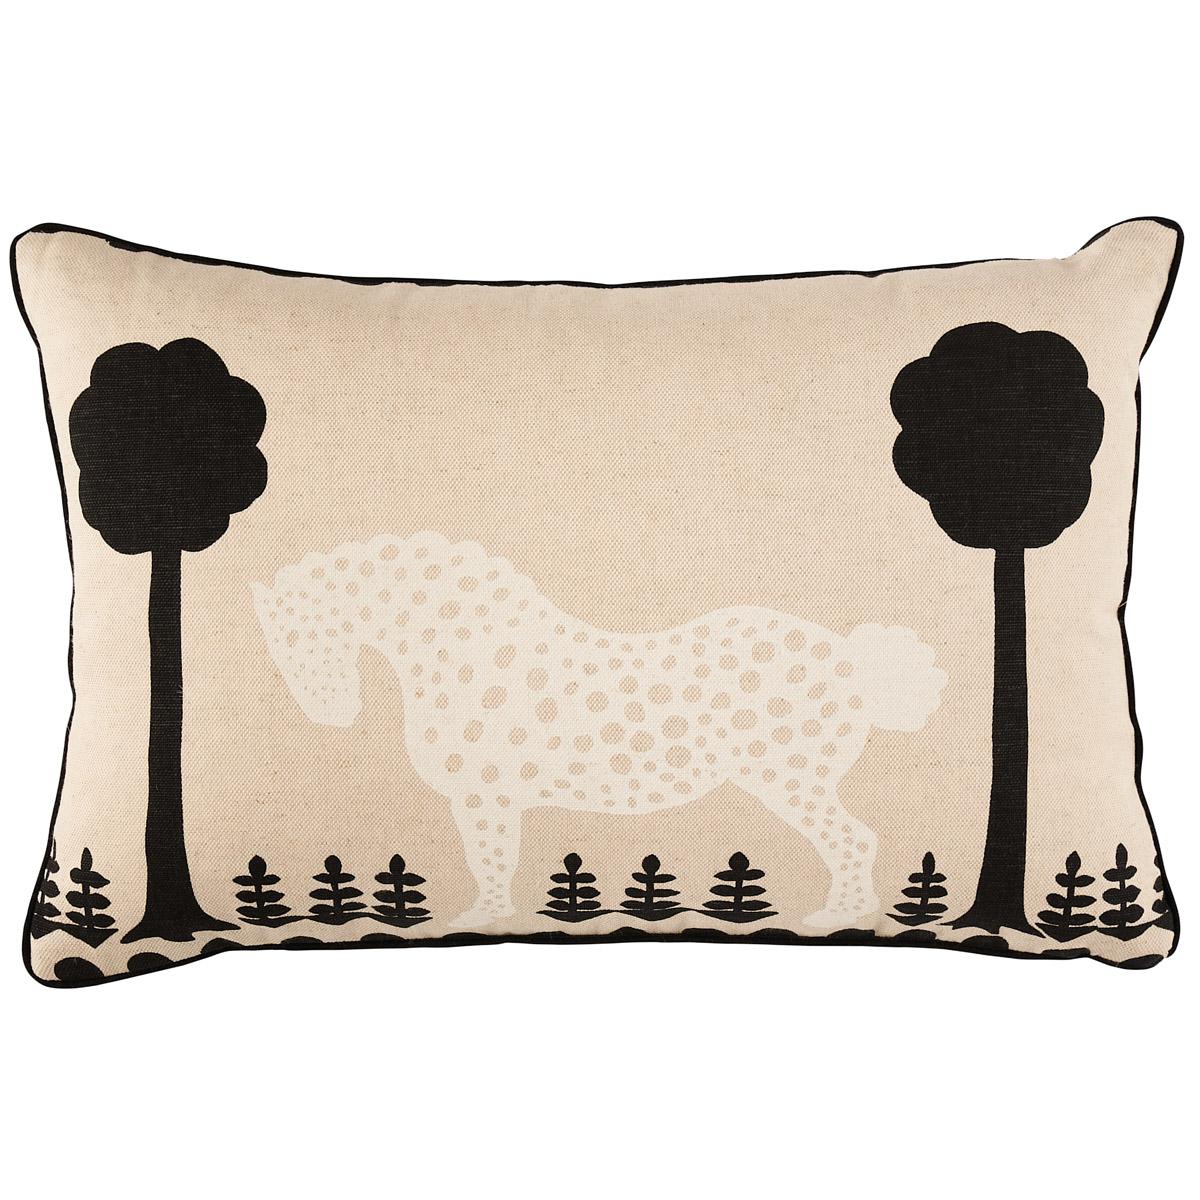 Schuamcher Polka Dot Pony 18" Pillow in Natural For Sale